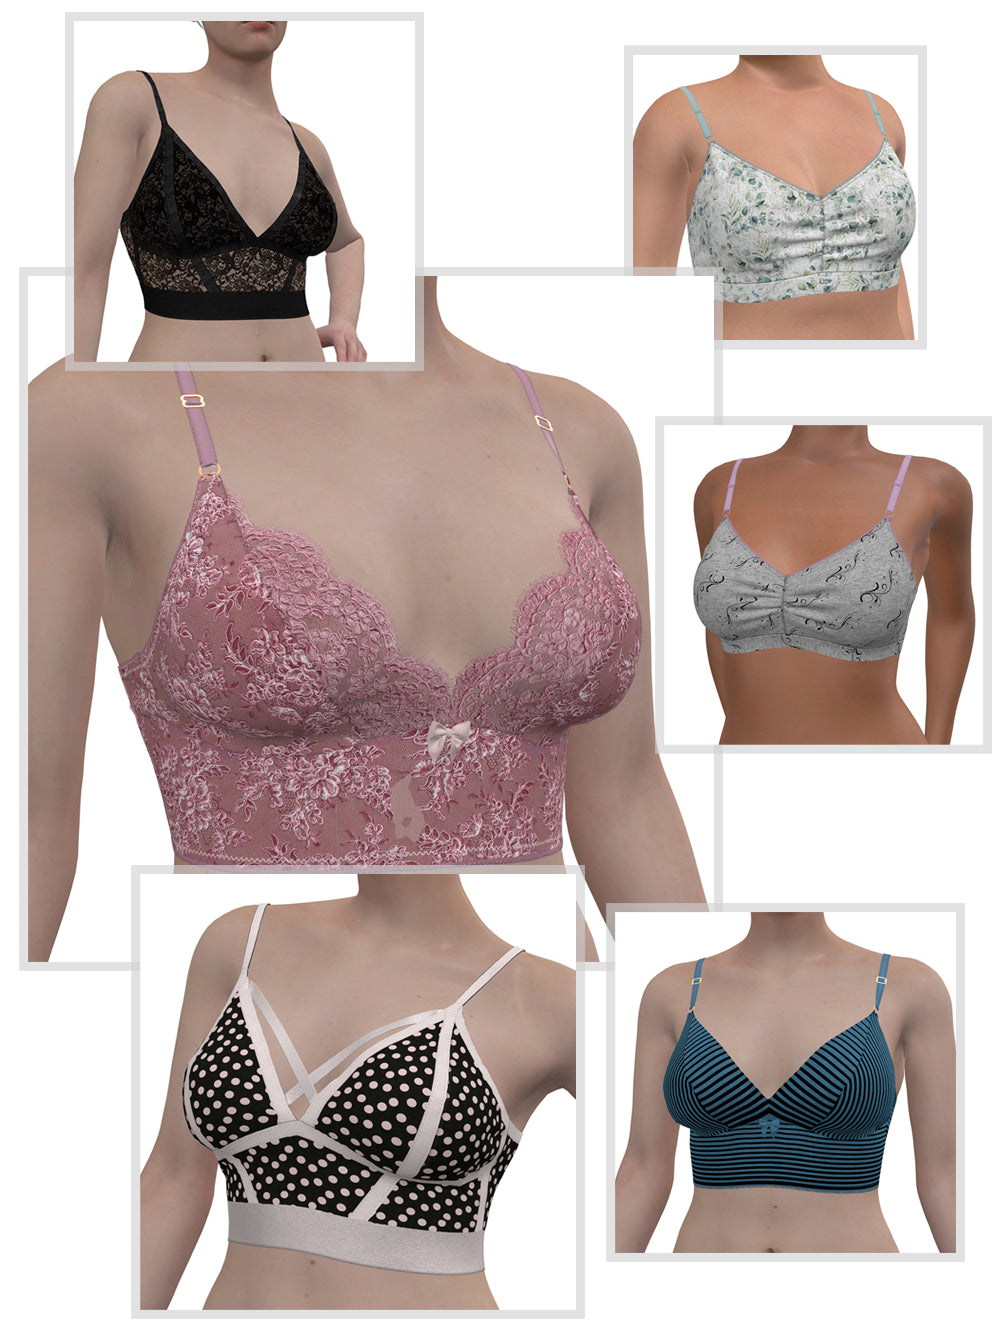 The Diverse and Wonderful World of Bralettes